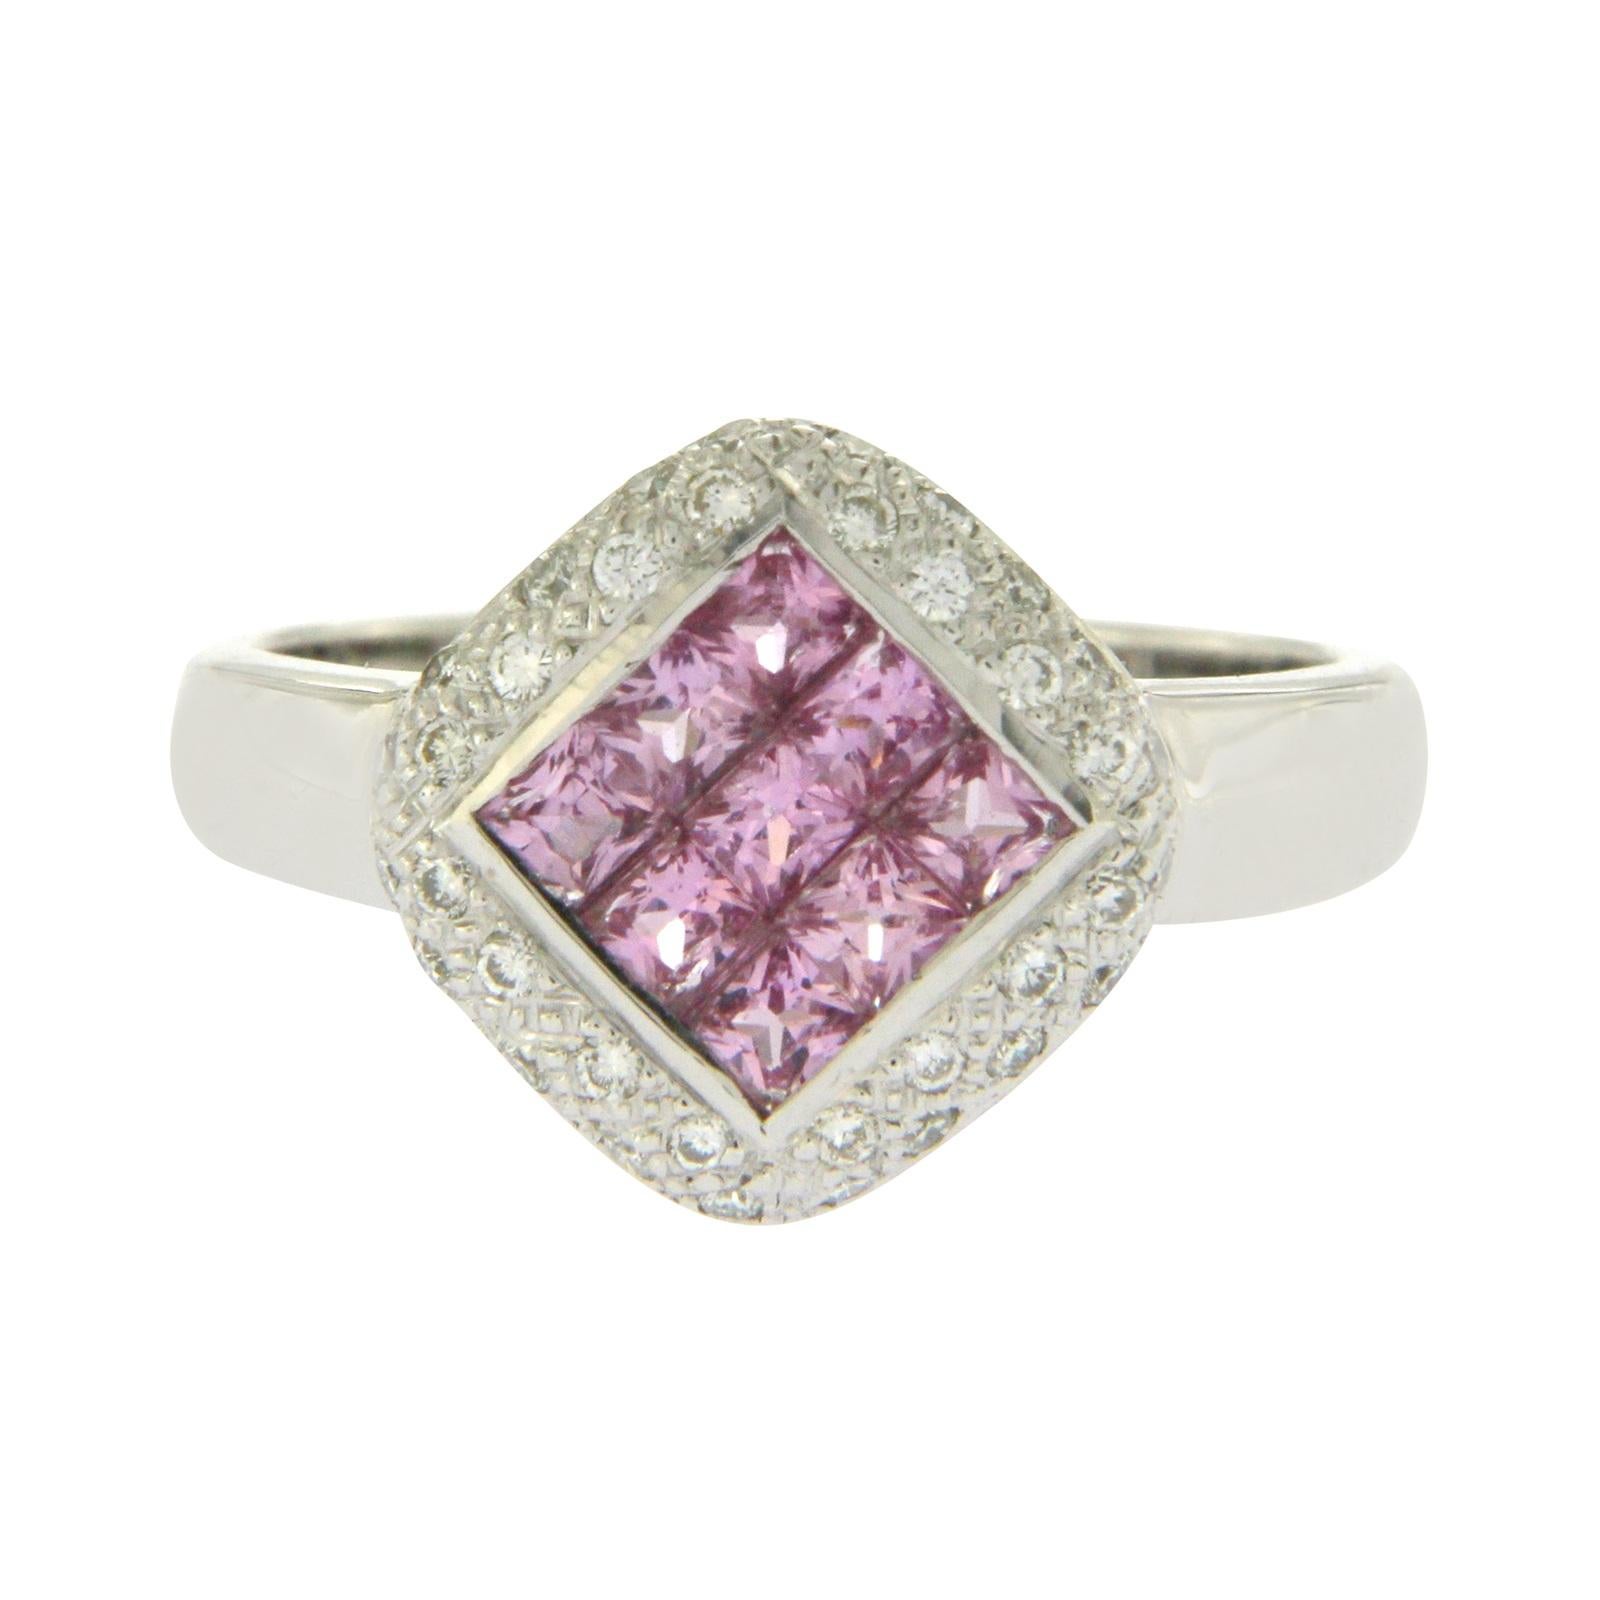 1.27 Carat Pink Sapphire and 0.24 Carat Diamonds in 18 Karat White Gold Ring For Sale 1